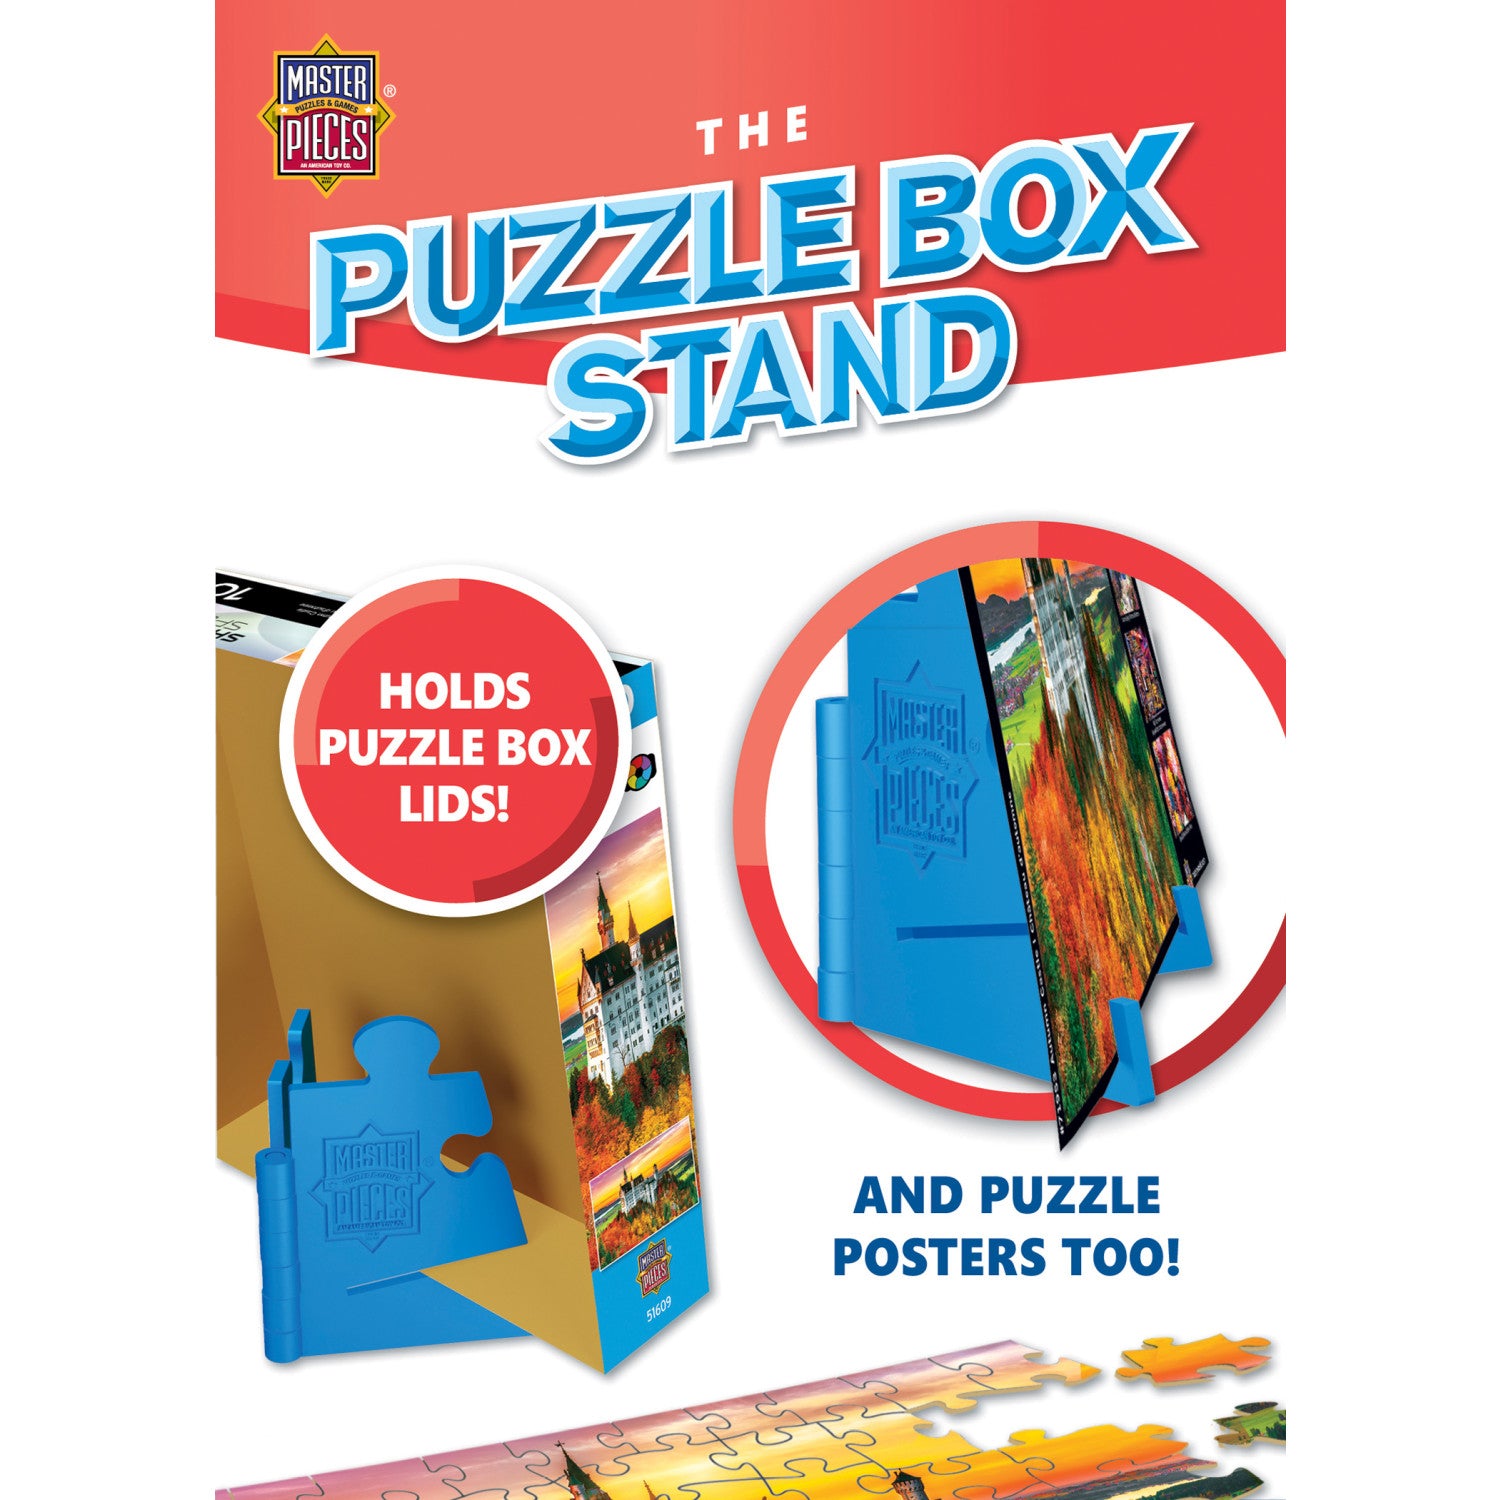 Puzzle Box Stand